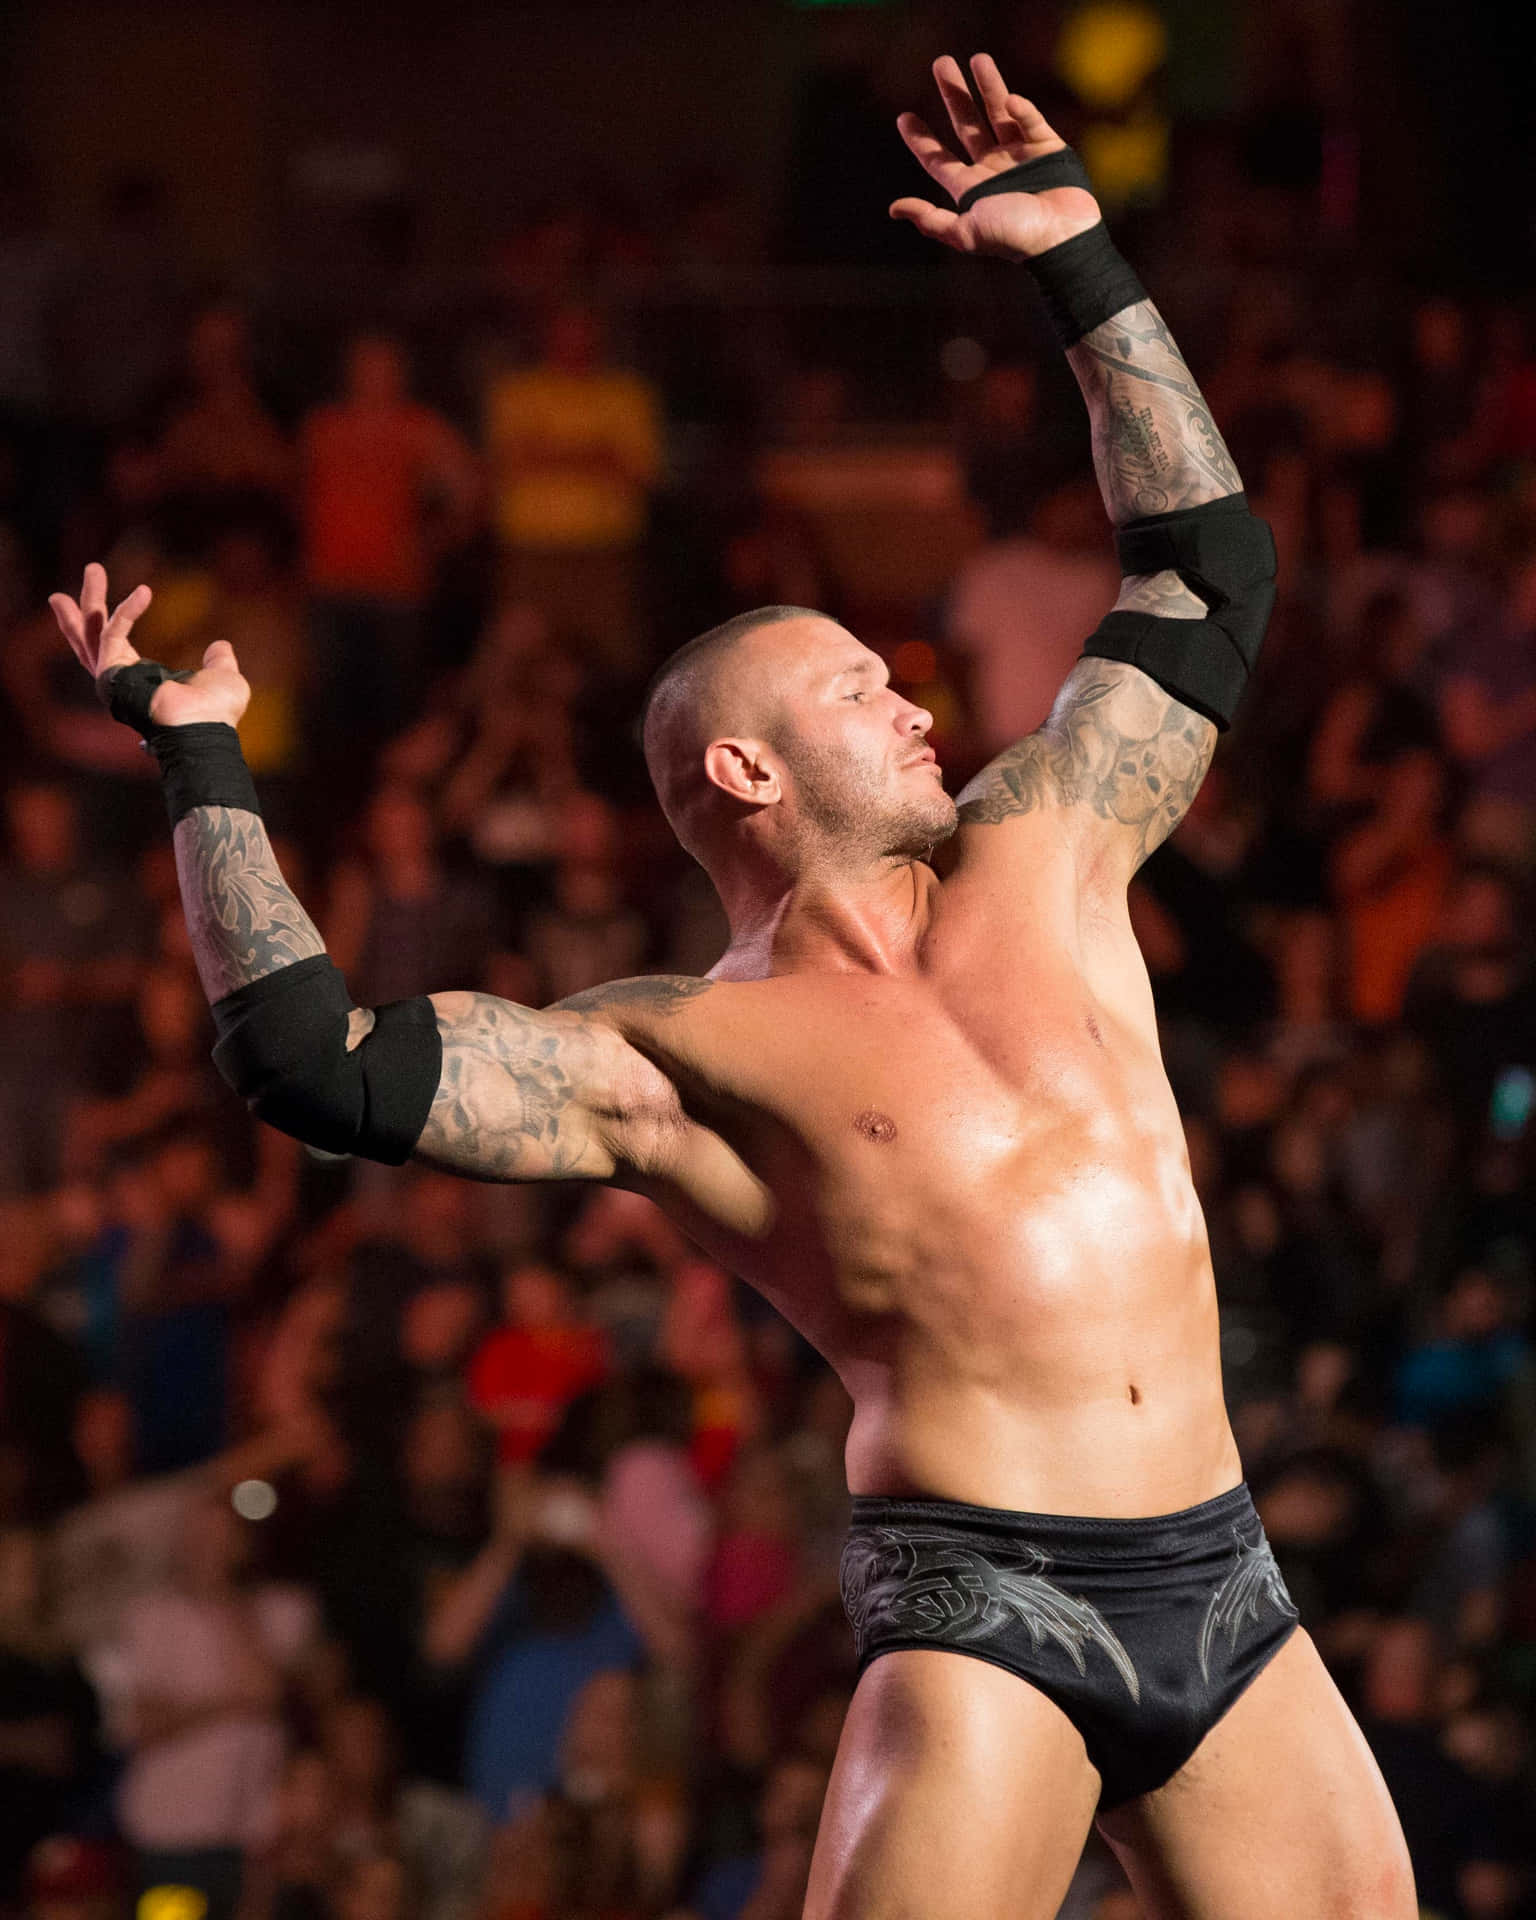 A Wrestler With Tattoos In The Air Background